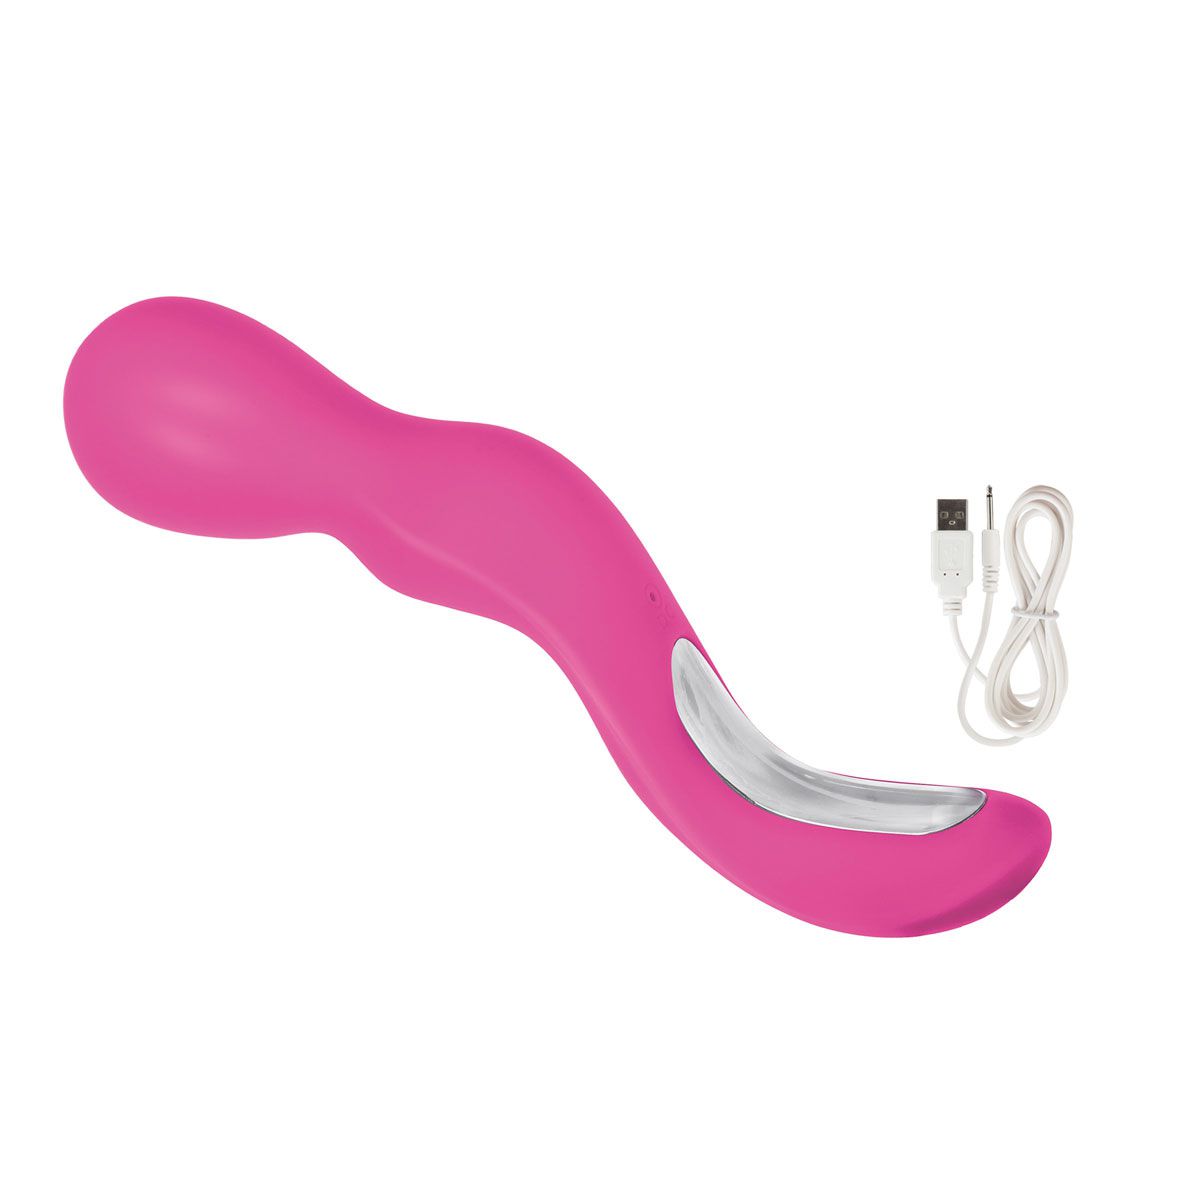   Lover s Wand - 22,75 .